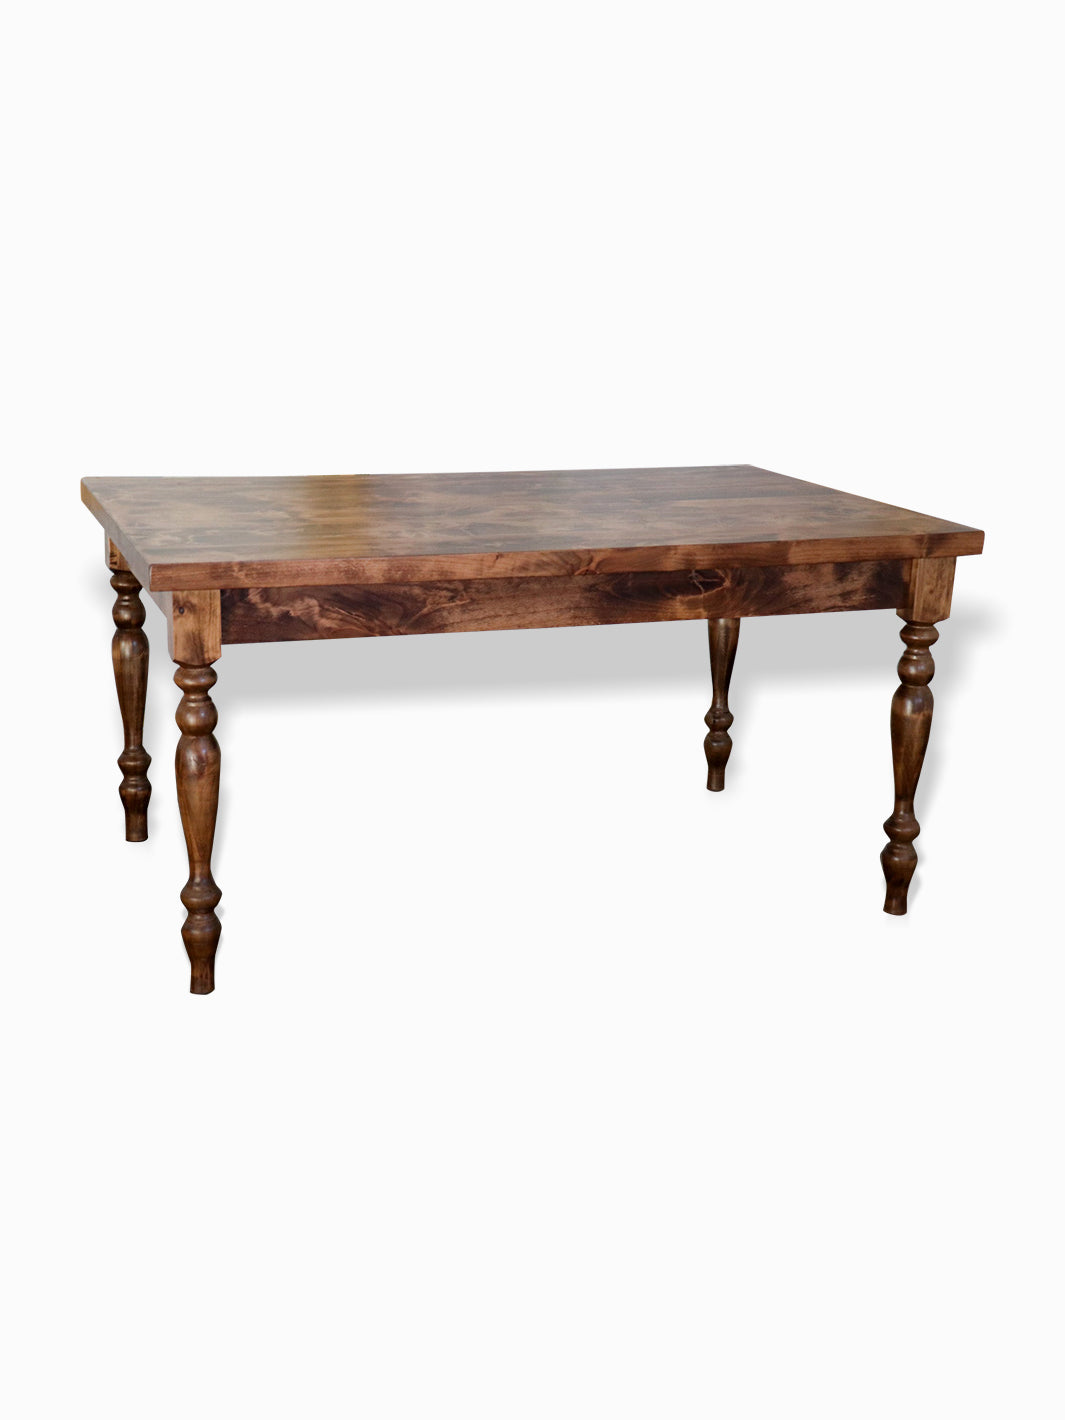 Handmade Alder Solid Wood Farmhouse Dining Table Earthly Comfort Dining Tables ECH01